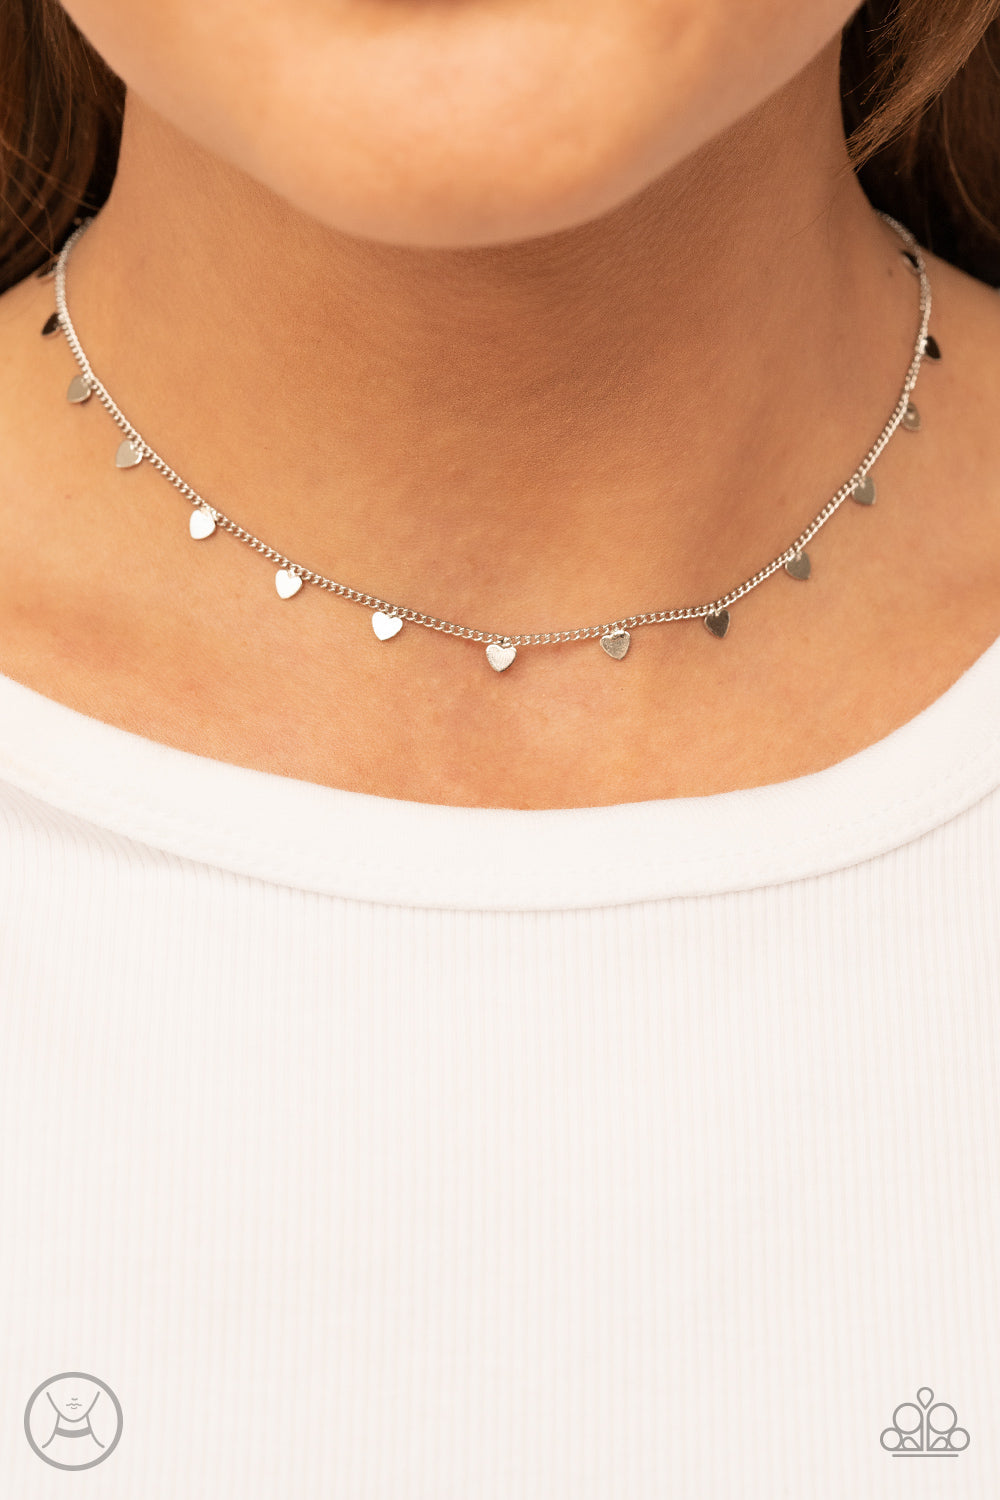 Cupids Cutest Valentine - Silver Heart Choker Necklace - Paparazzi Accessories - Dainty silver hearts dance from a dainty silver chain around the neck, creating a flirtatious fringe fashion choker necklace.